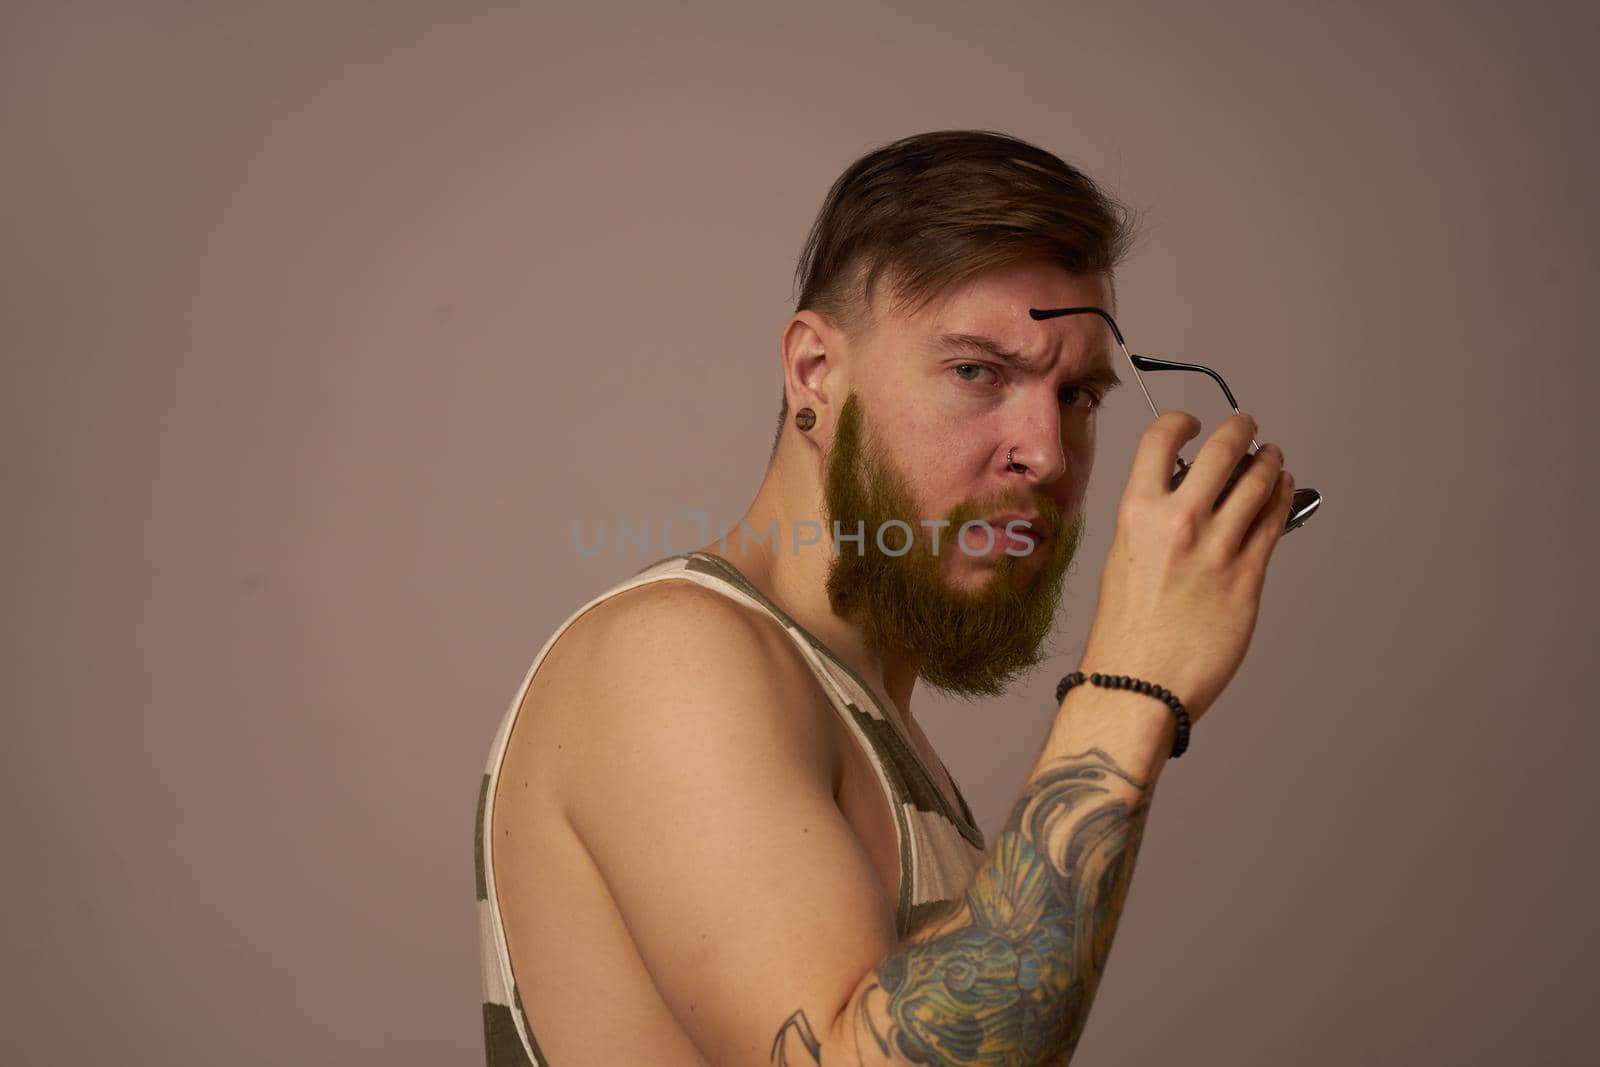 brutal man tattoos on his arms posing lifestyle form cropped view. High quality photo